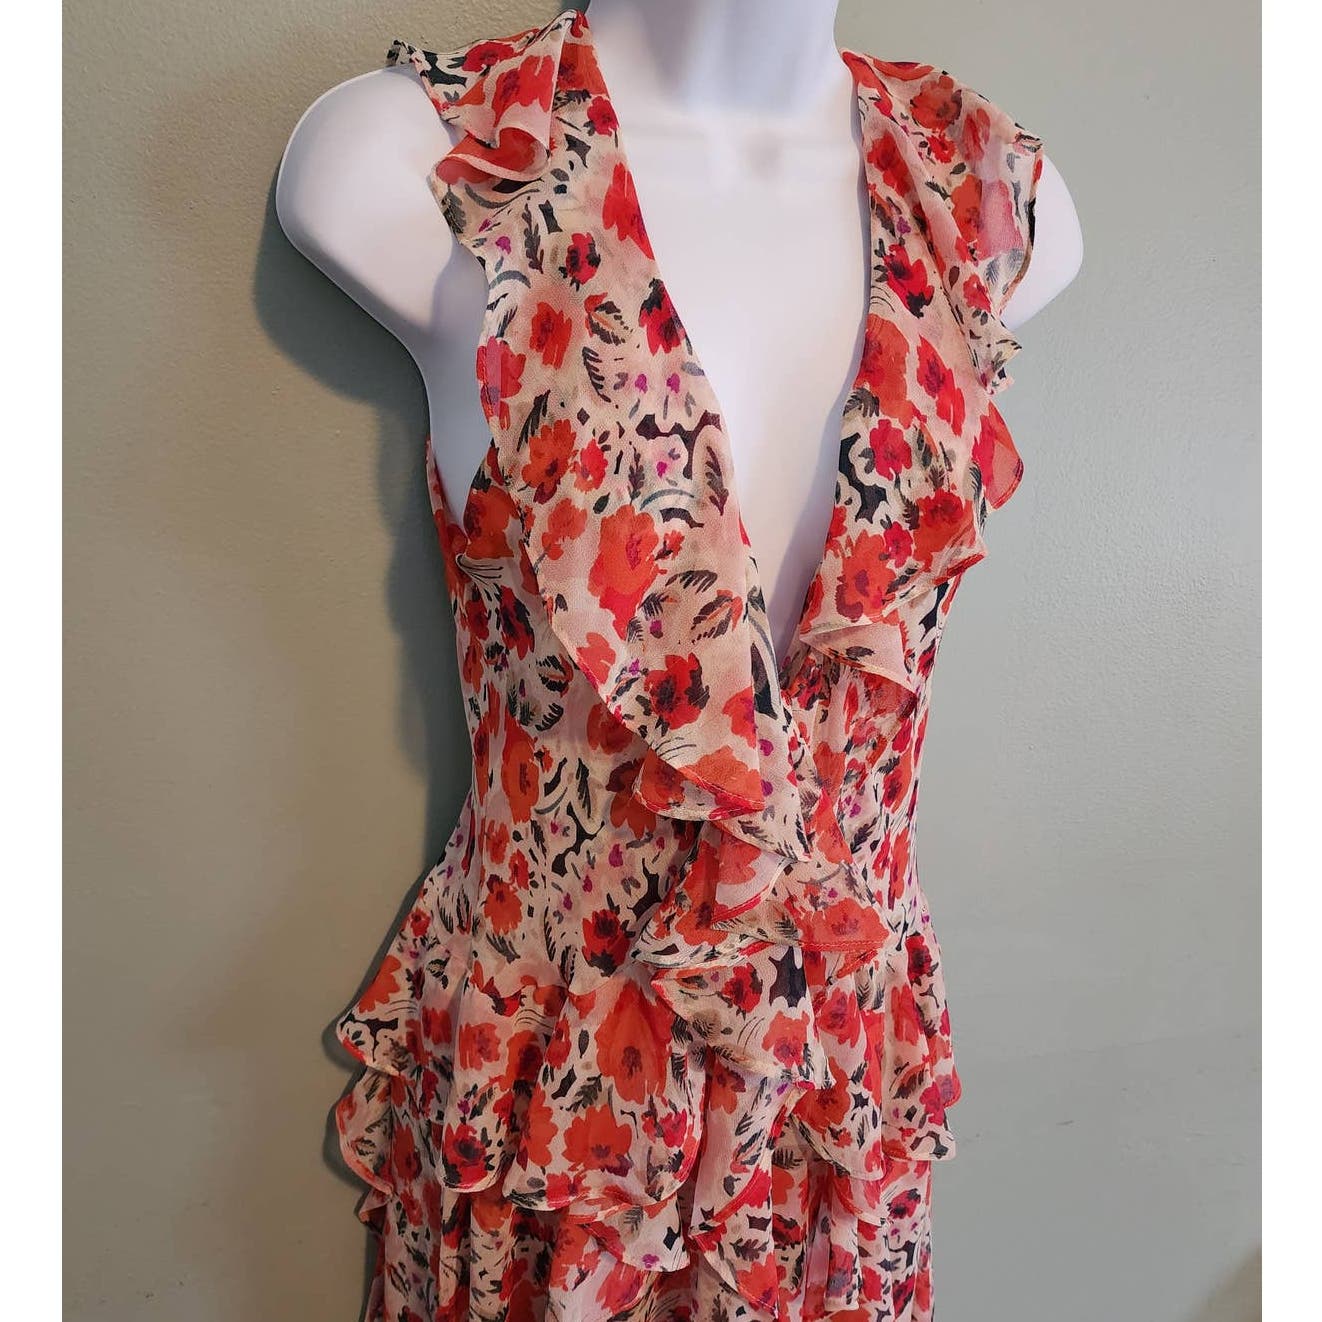 MISA Claudita Red Floral Maxi Dress size Small